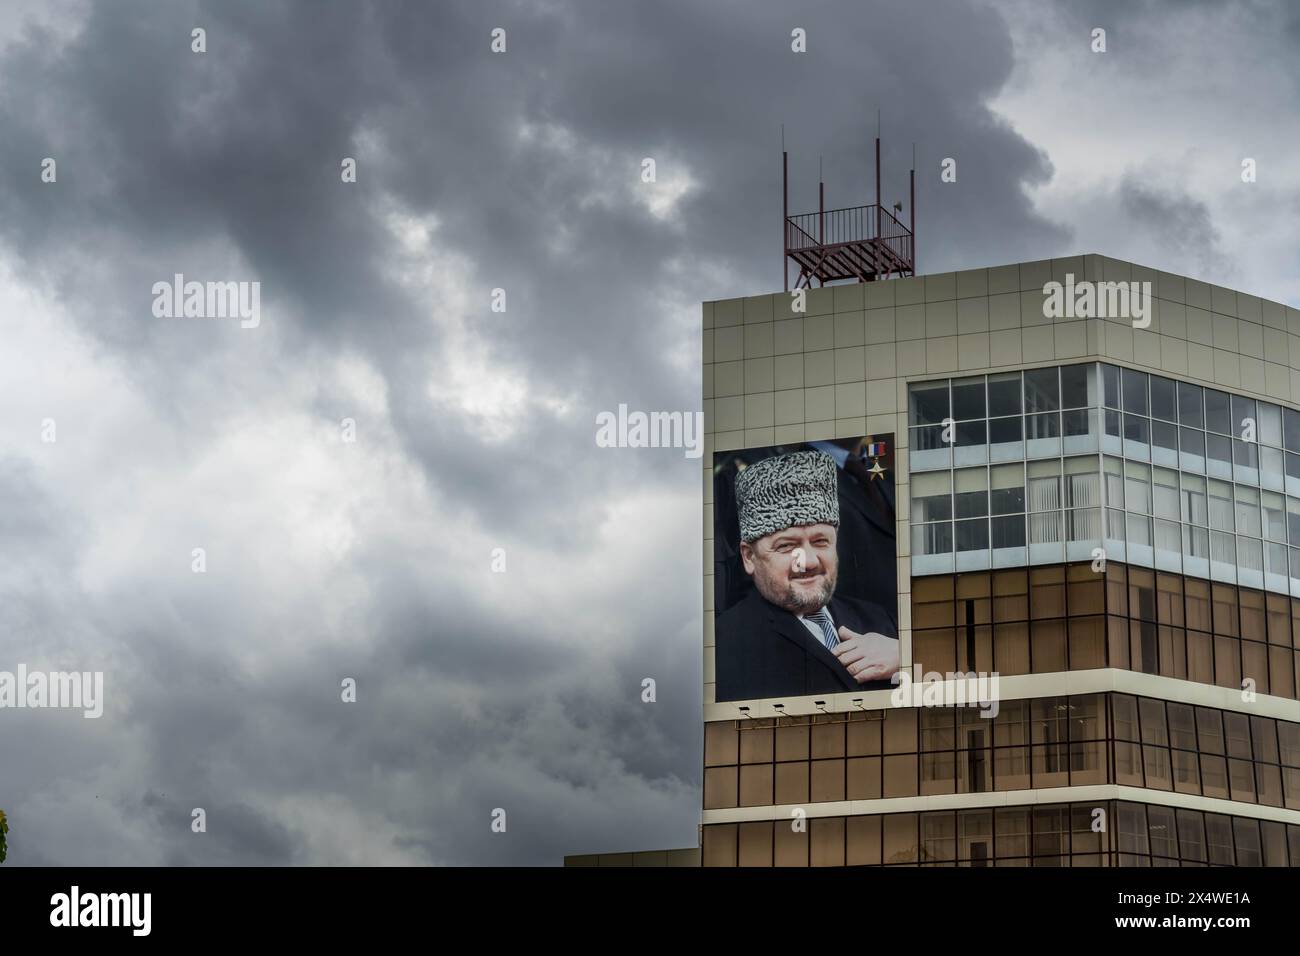 The giant portrait of Chechen Republic ex-president Akhmad Kadyrov on the facade of the building in Grozny, Republic of Chechnya, Russia. Stock Photo